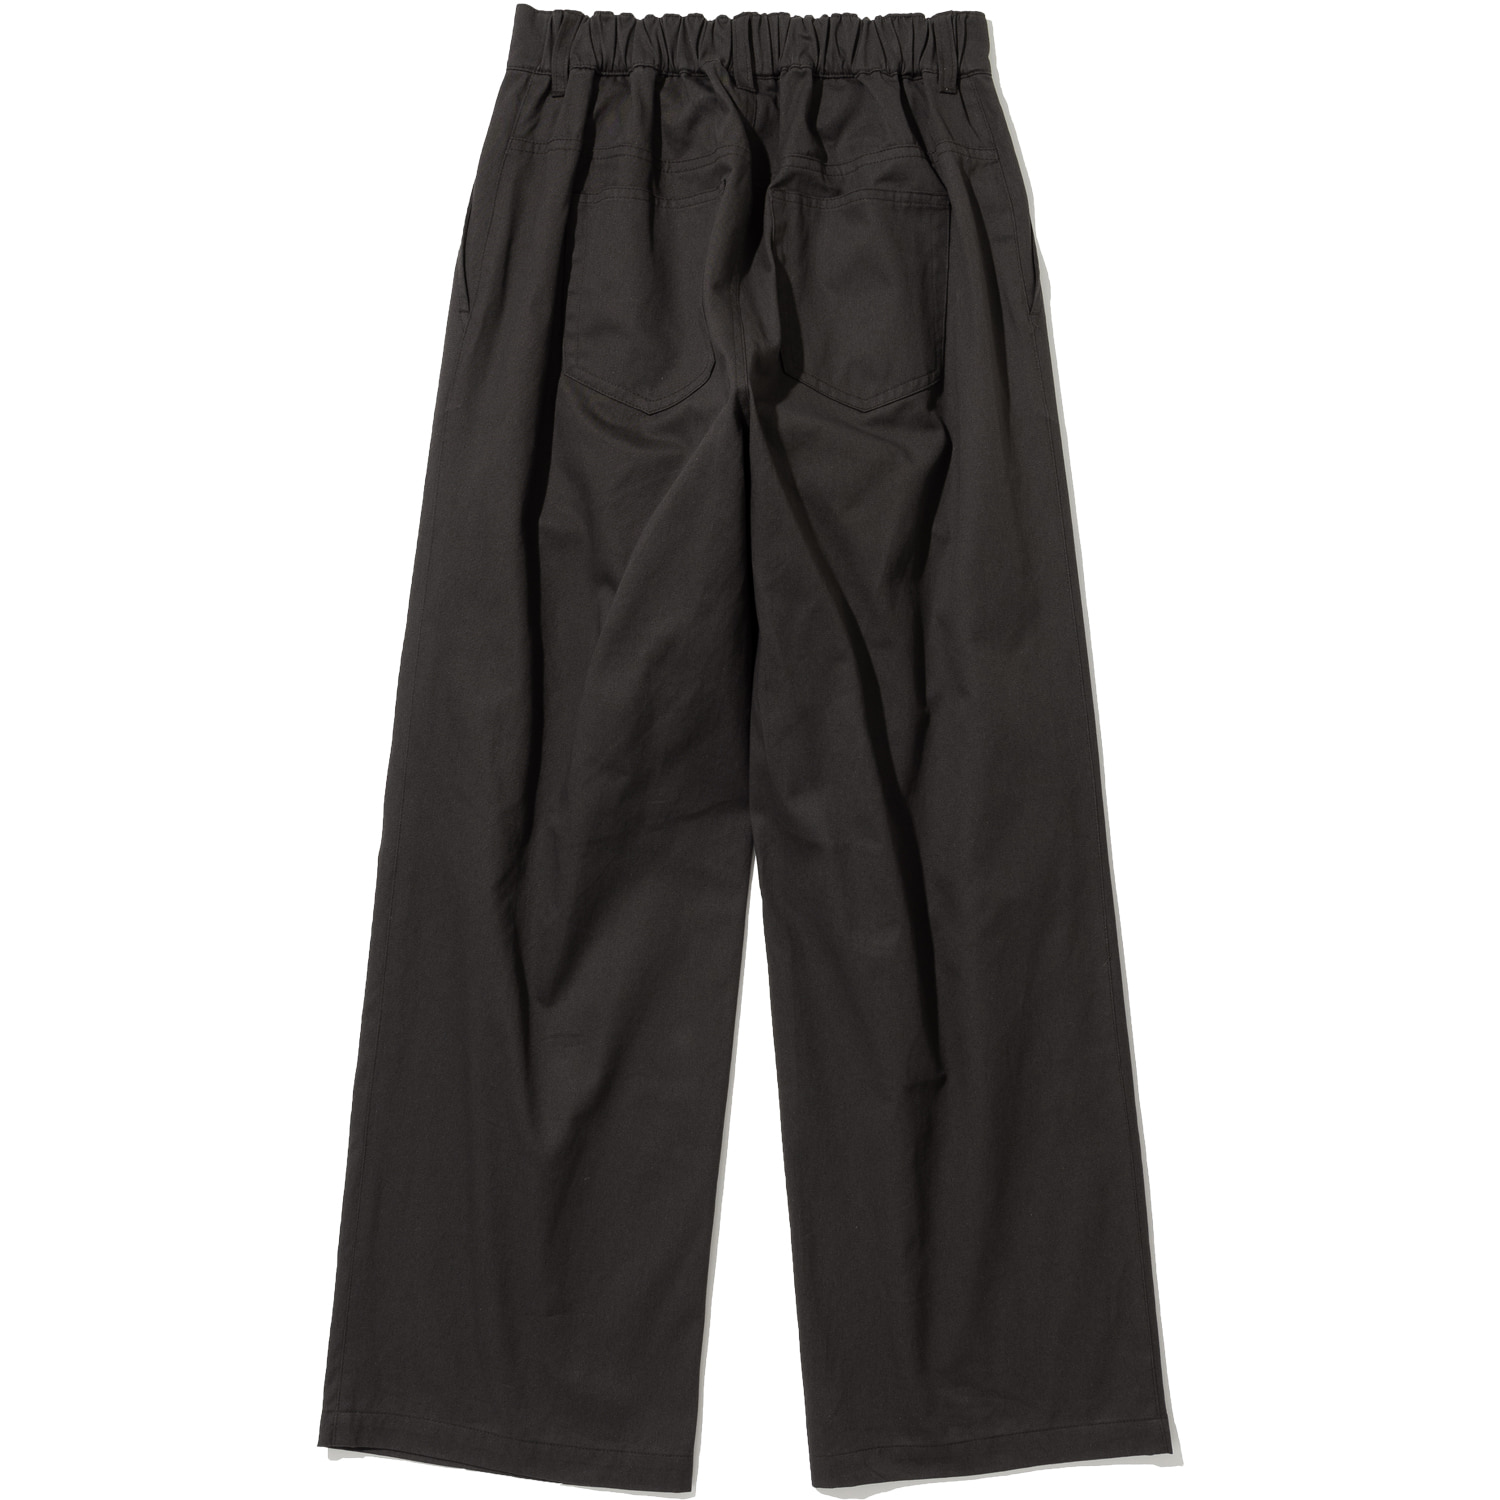 Two Tuck Wide Cotton Pants - Charcoal,NOT4NERD